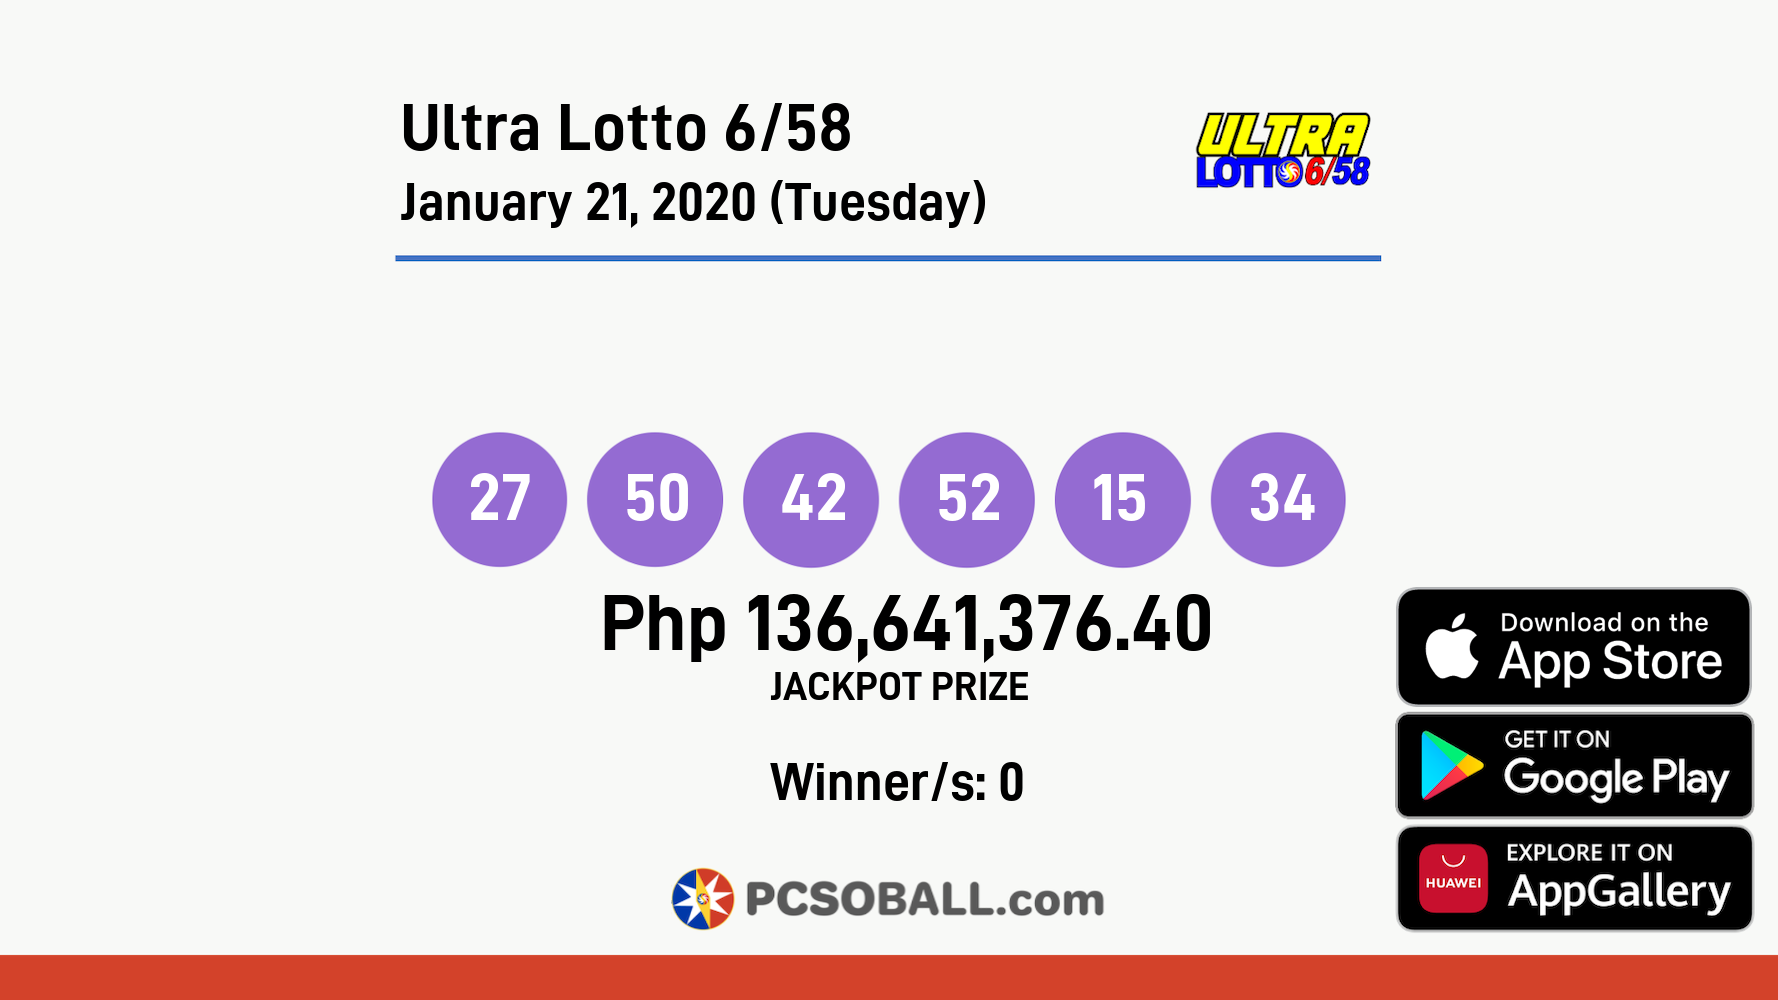 Ultra Lotto 6/58 January 21, 2020 (Tuesday) Result